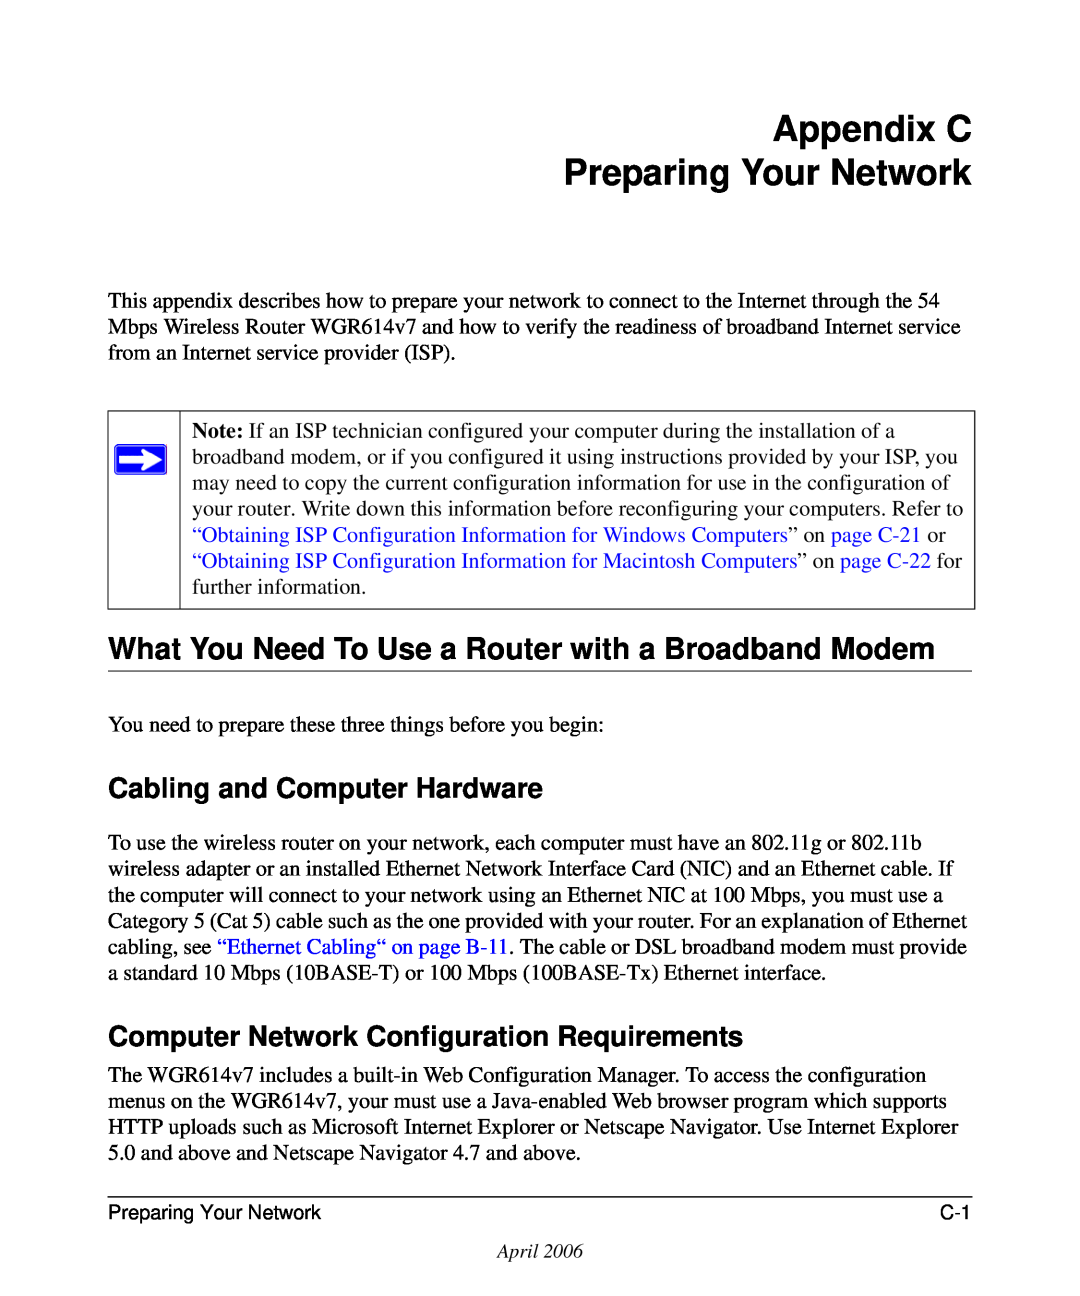 NETGEAR WGR614v7 manual Appendix C Preparing Your Network, What You Need To Use a Router with a Broadband Modem 